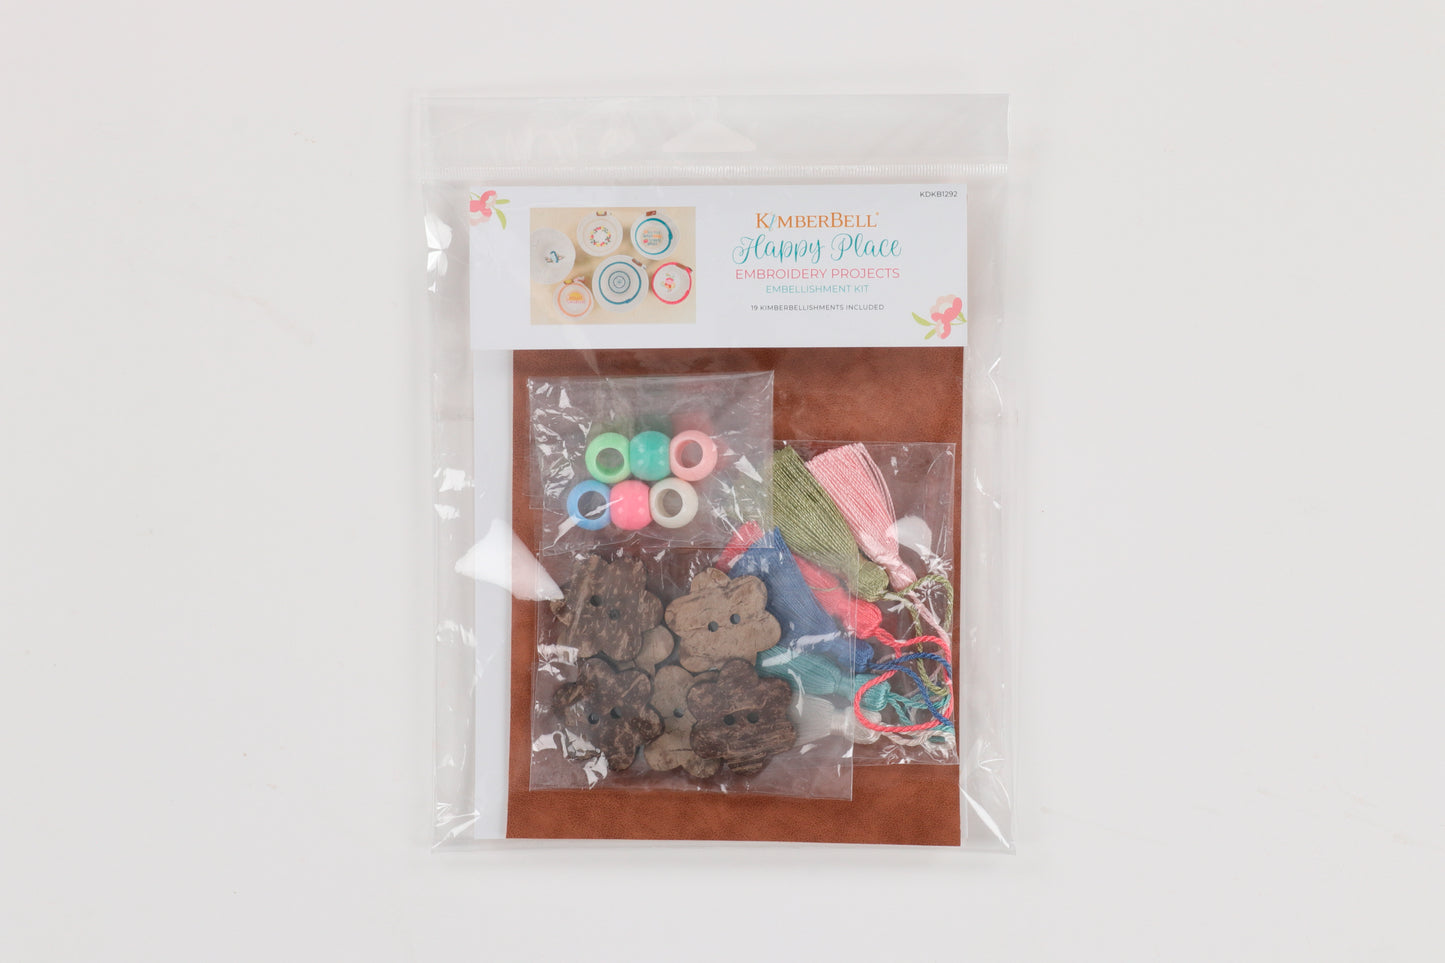 With the Happy Place Embroidery Projects Embellishment Kit (KDKB1292), create stunning gifts and decor with leather, tassels, and beautiful beads! Photo shows front of package.